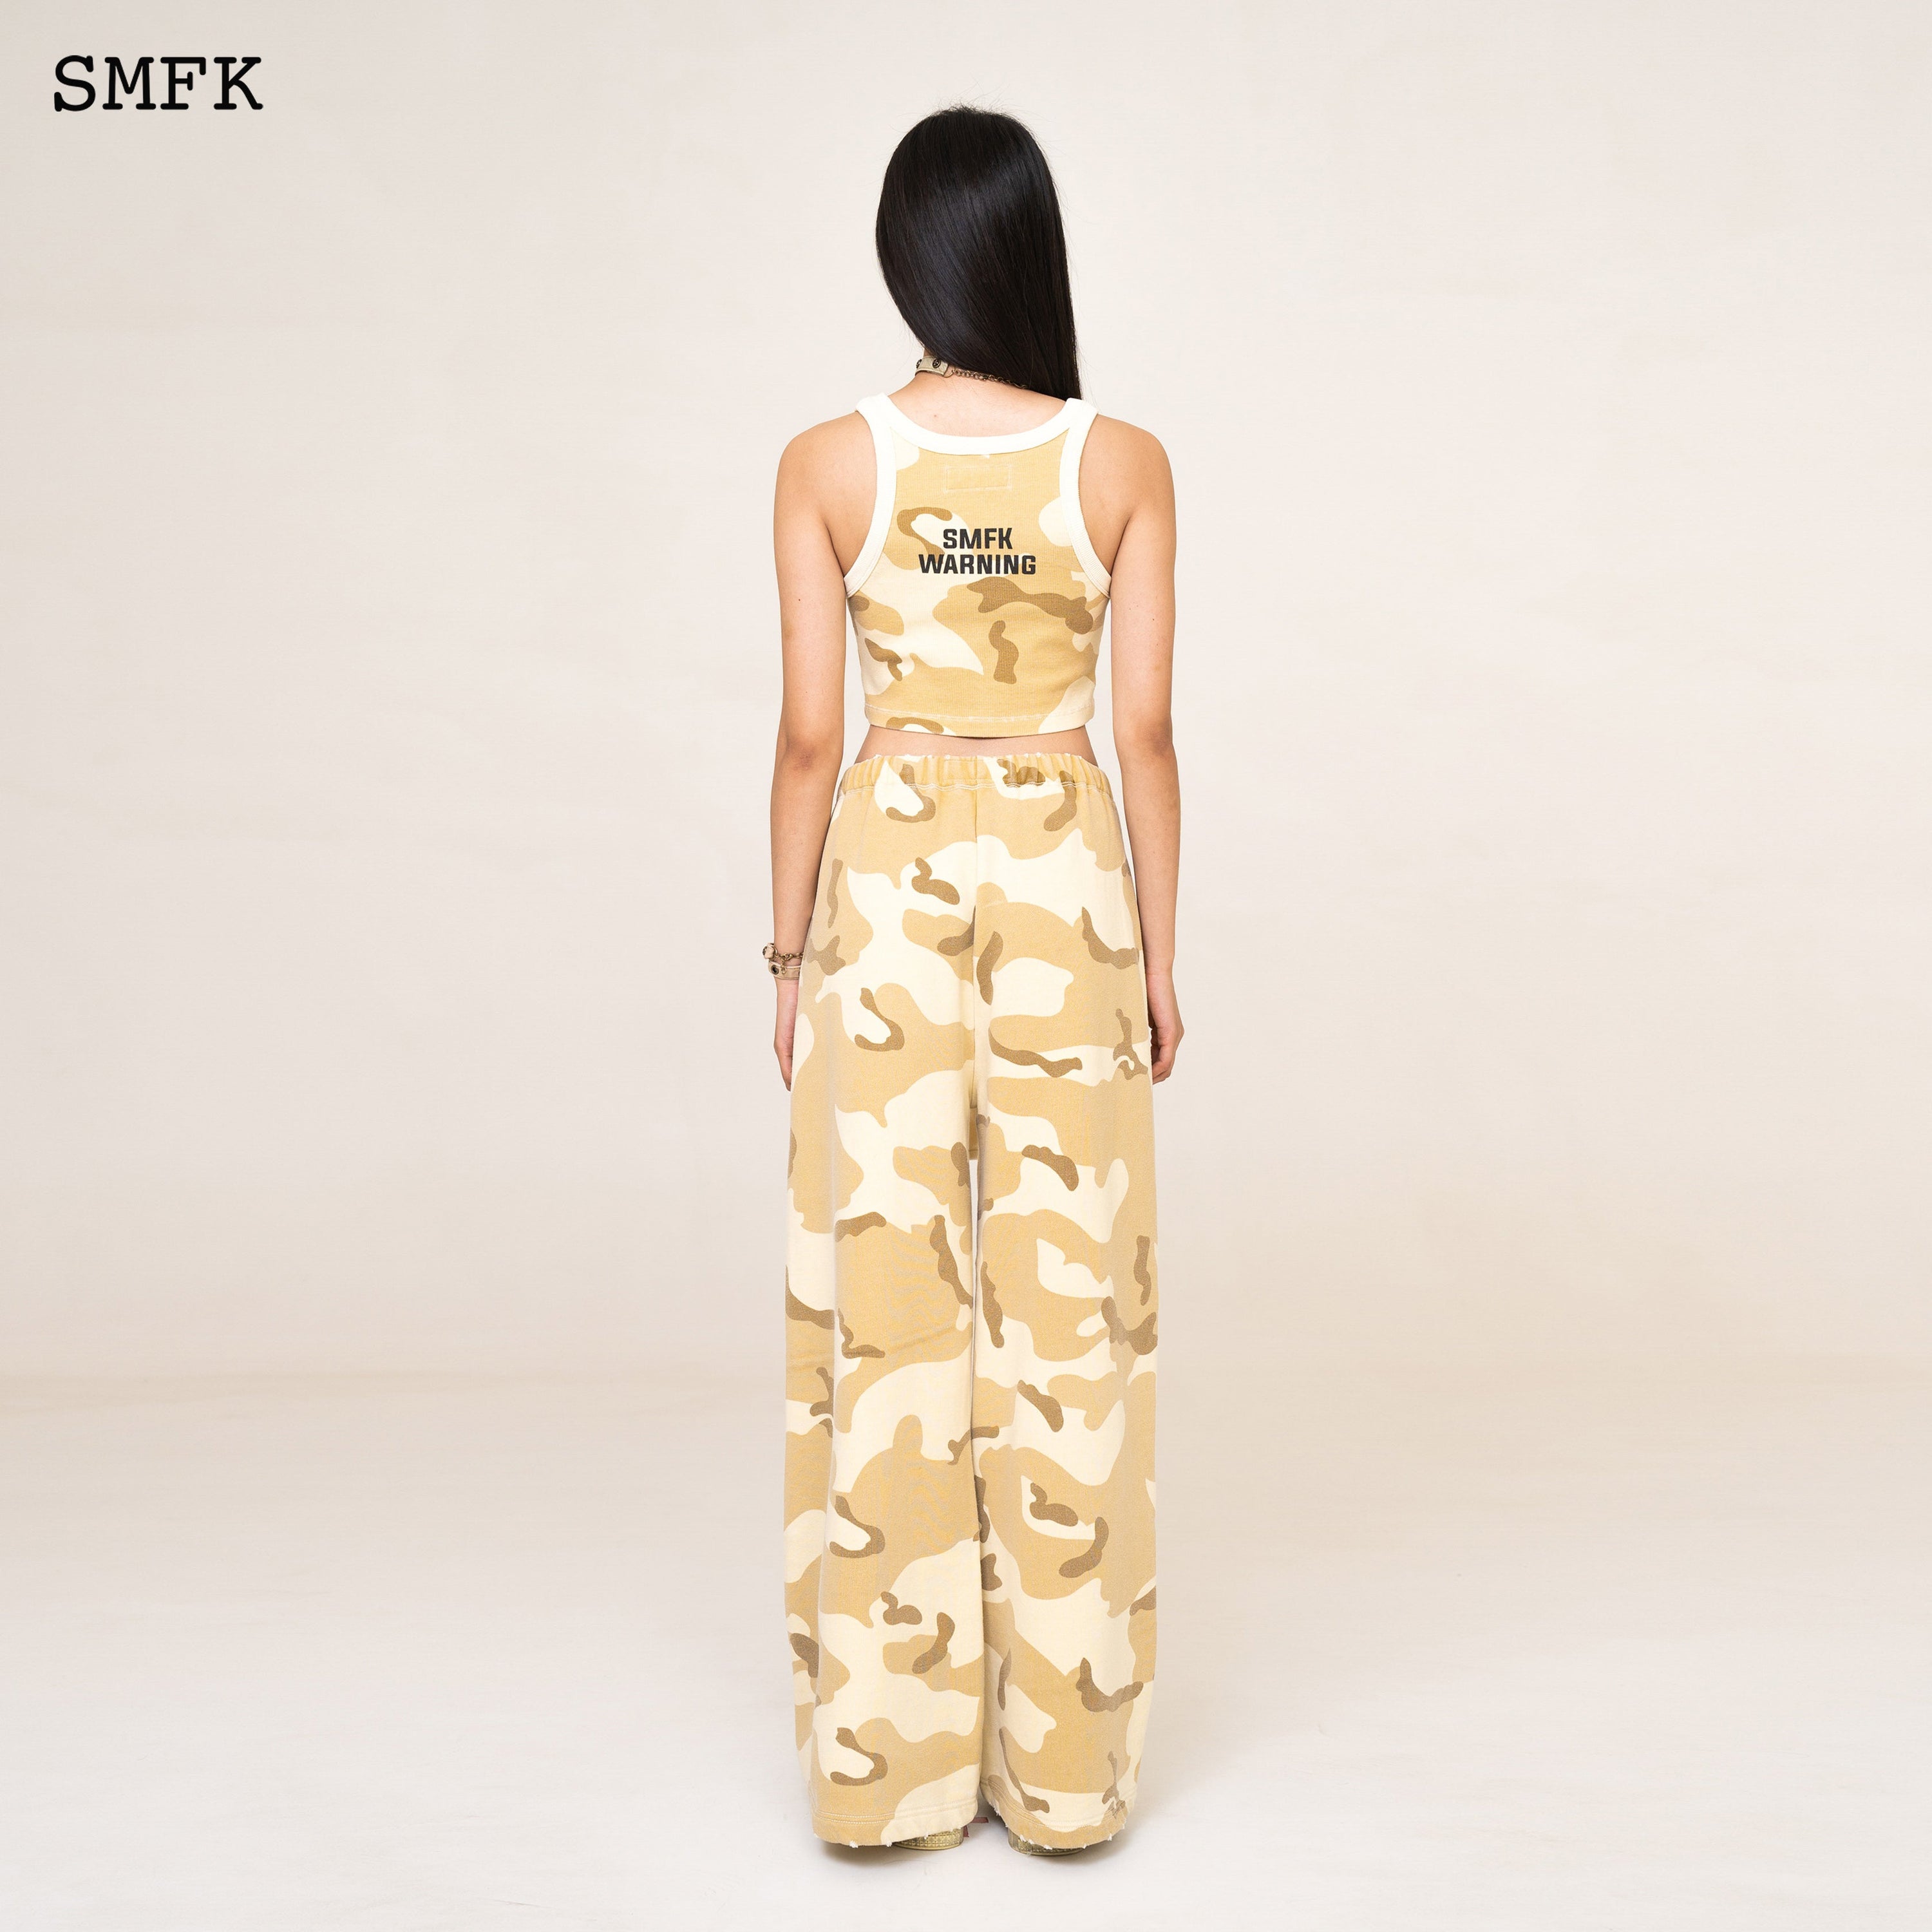 WildWorld Desert Camouflage Sweatpants Culottes - SMFK Official